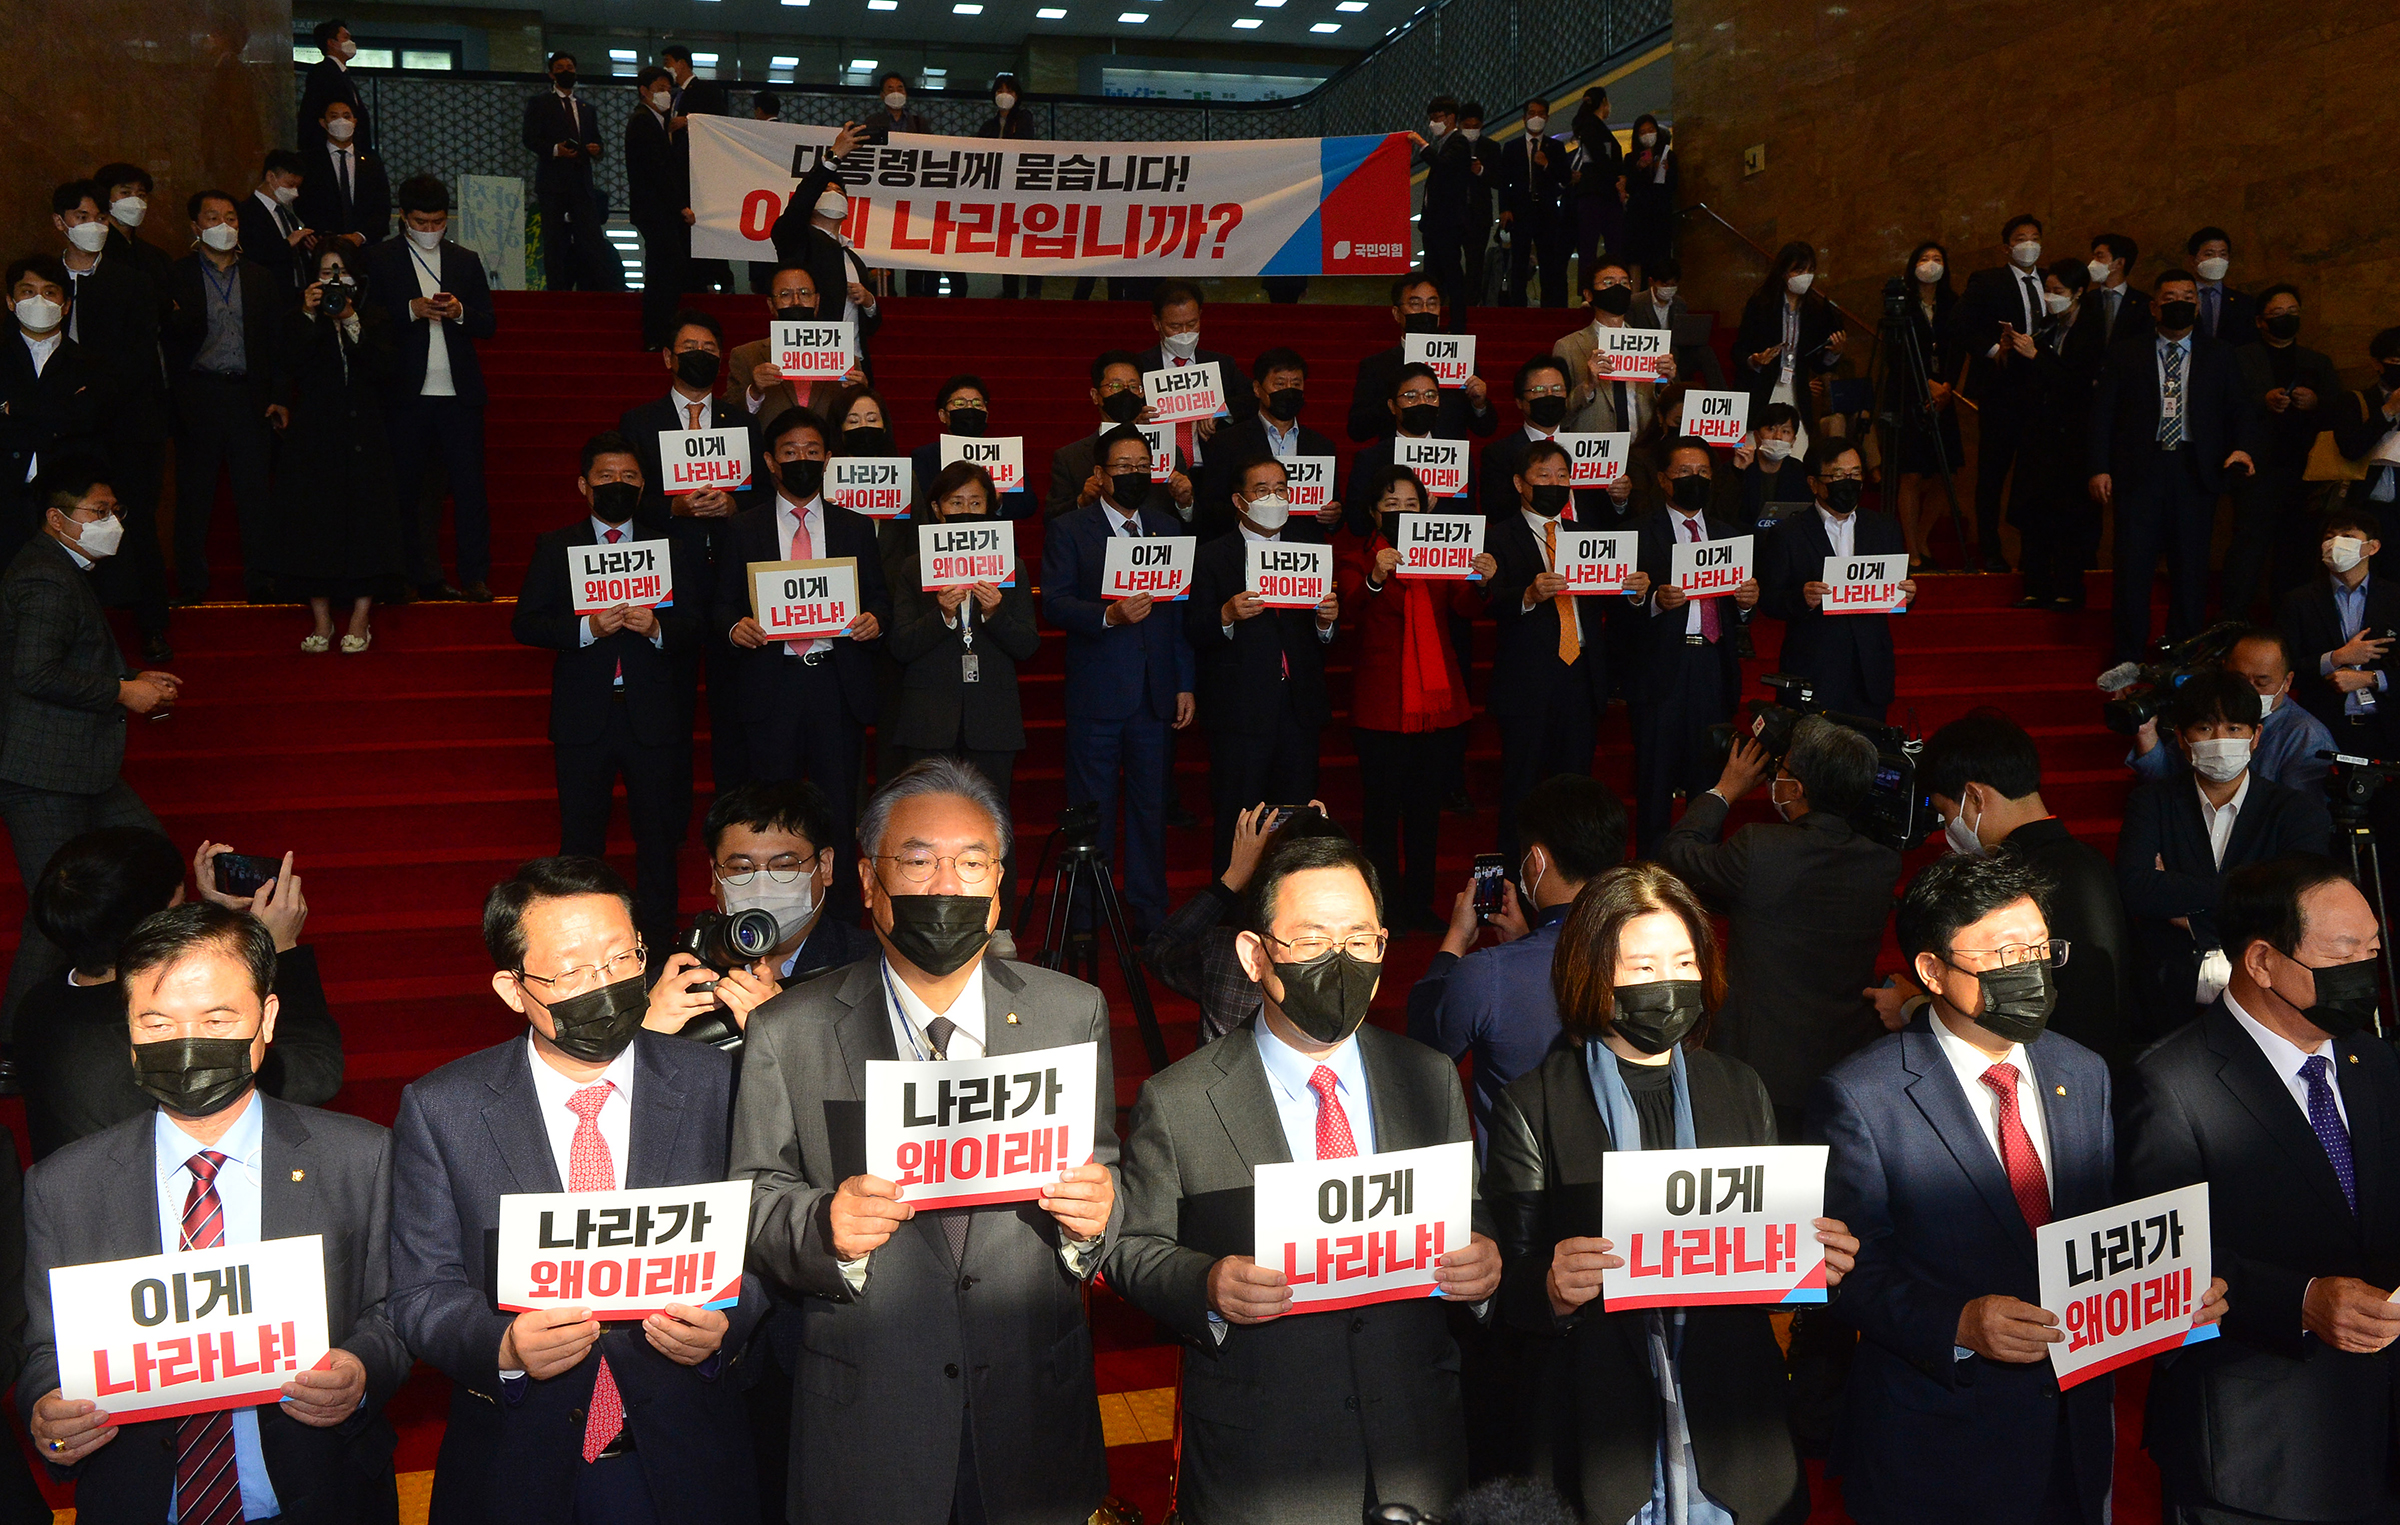 Opposition lawmakers protest against Moon's leadership outside South Korea's National Assembly on Oct. 28, 2020. (YONHAP/EPA-EFE/Shutterstock)